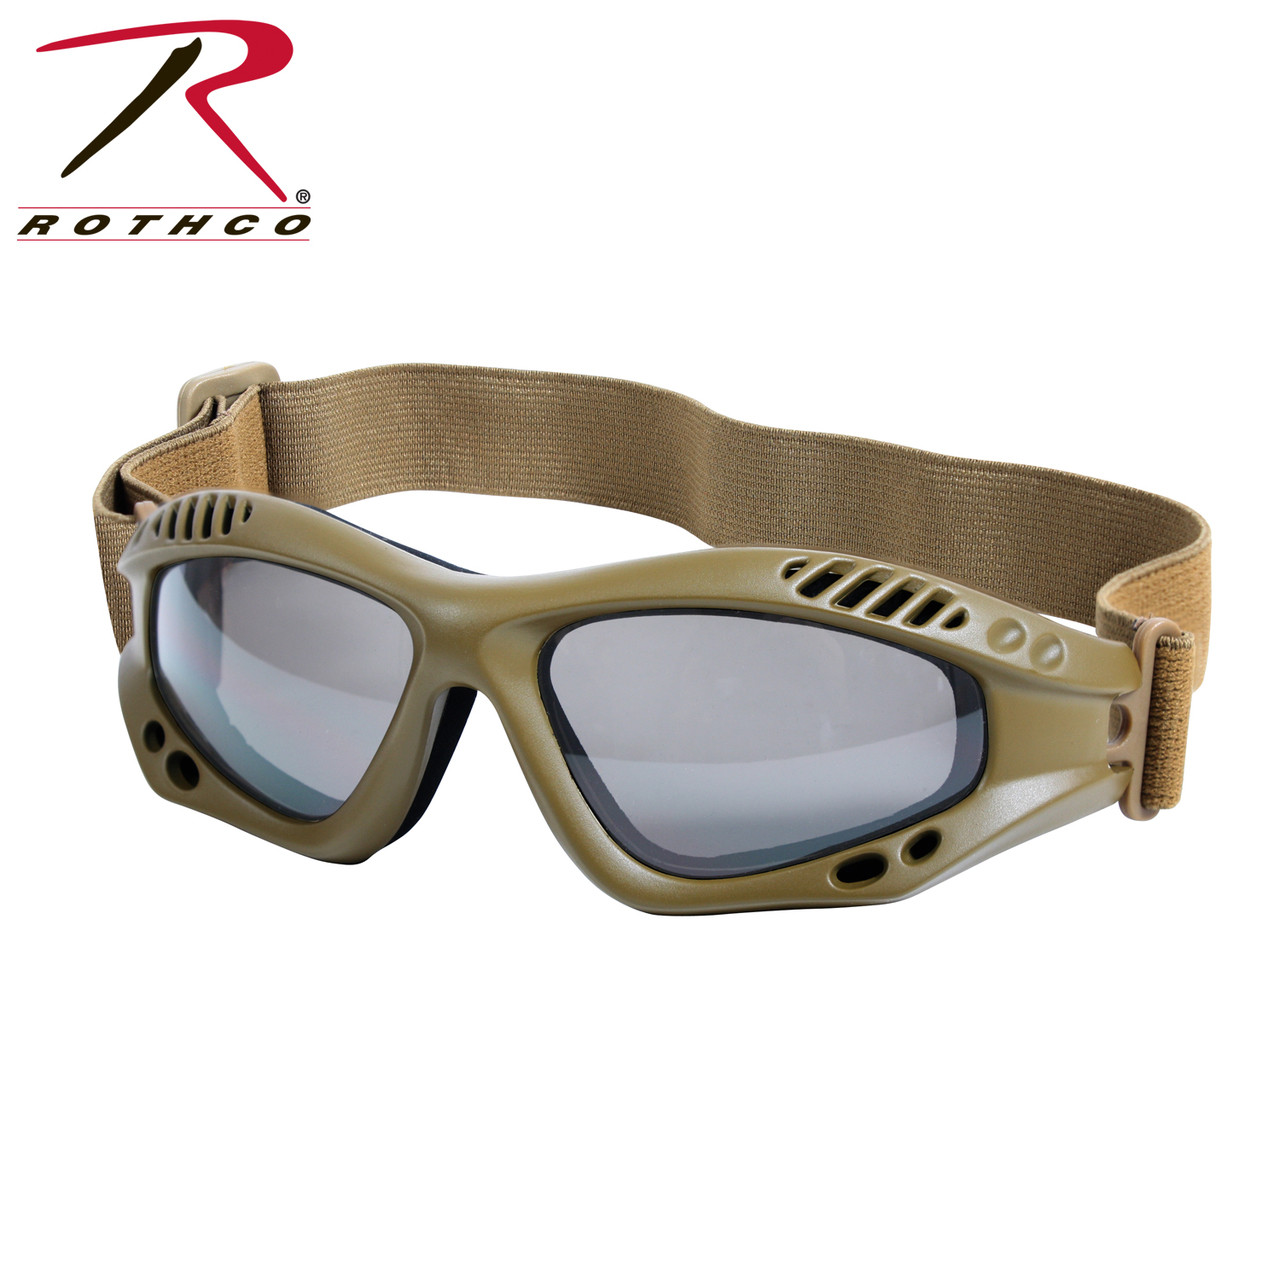 Military Style Infantry Shooters Goggles UV 400 Shatterproof Antiscratch 